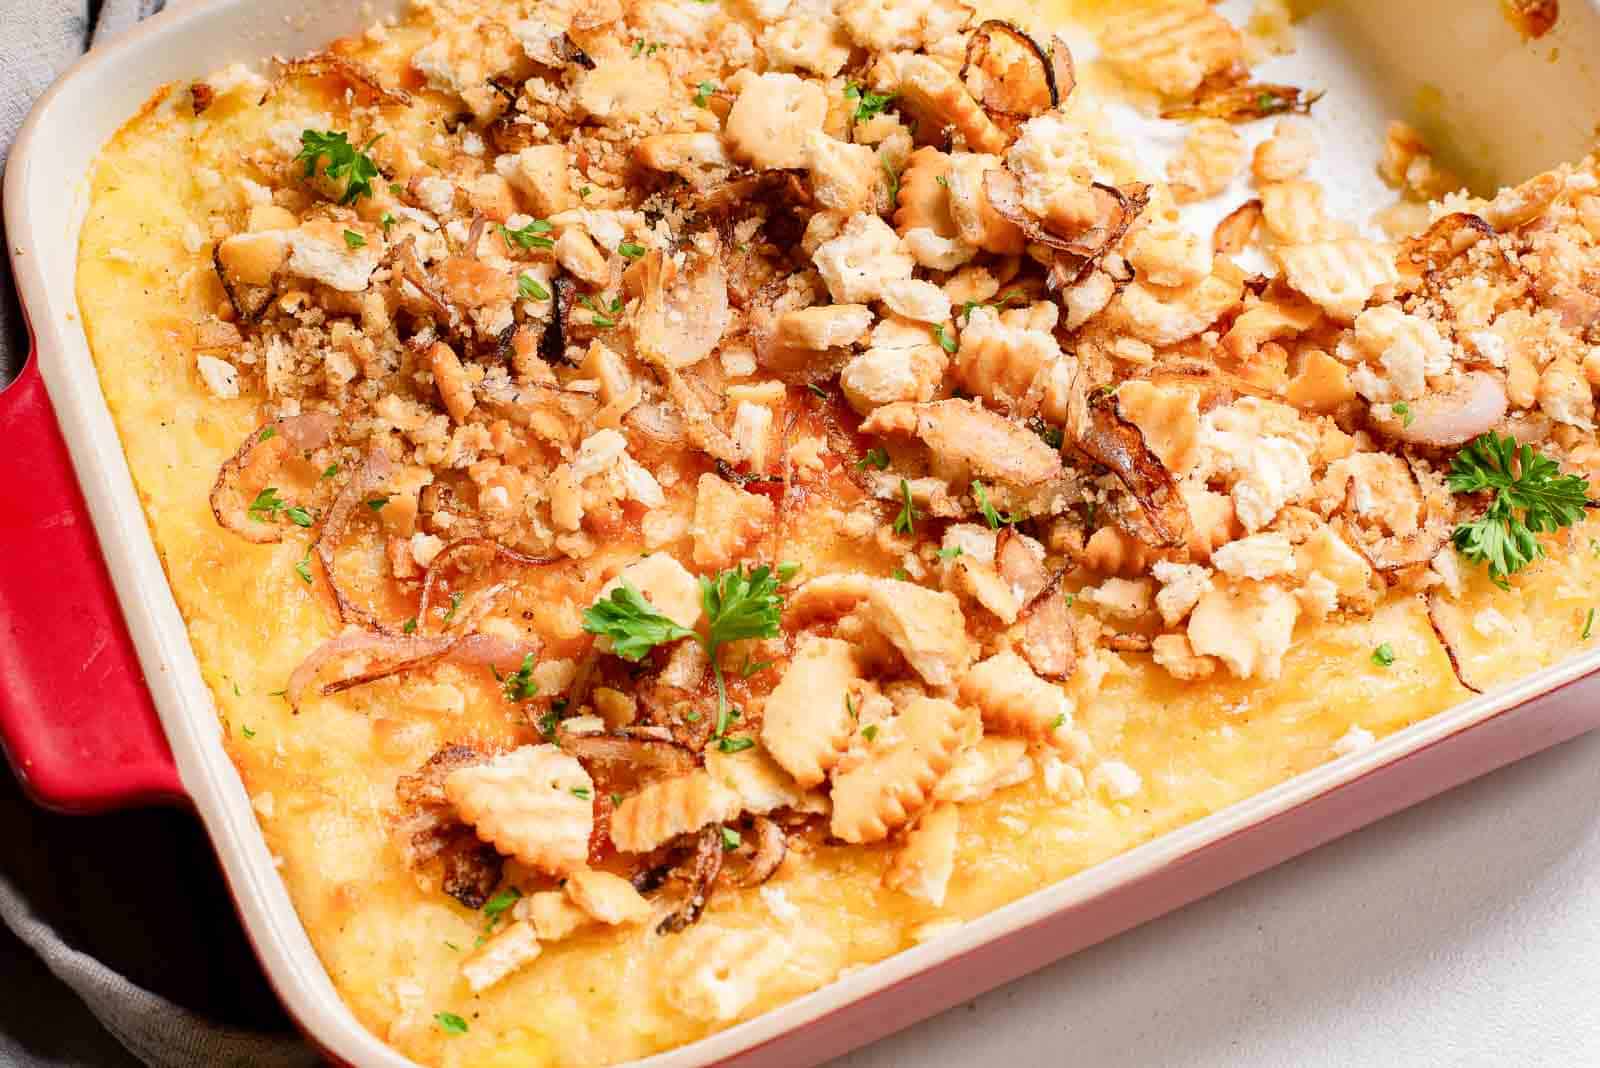 Masshed potato casserole in a baking dish with a cracker crumb topping.